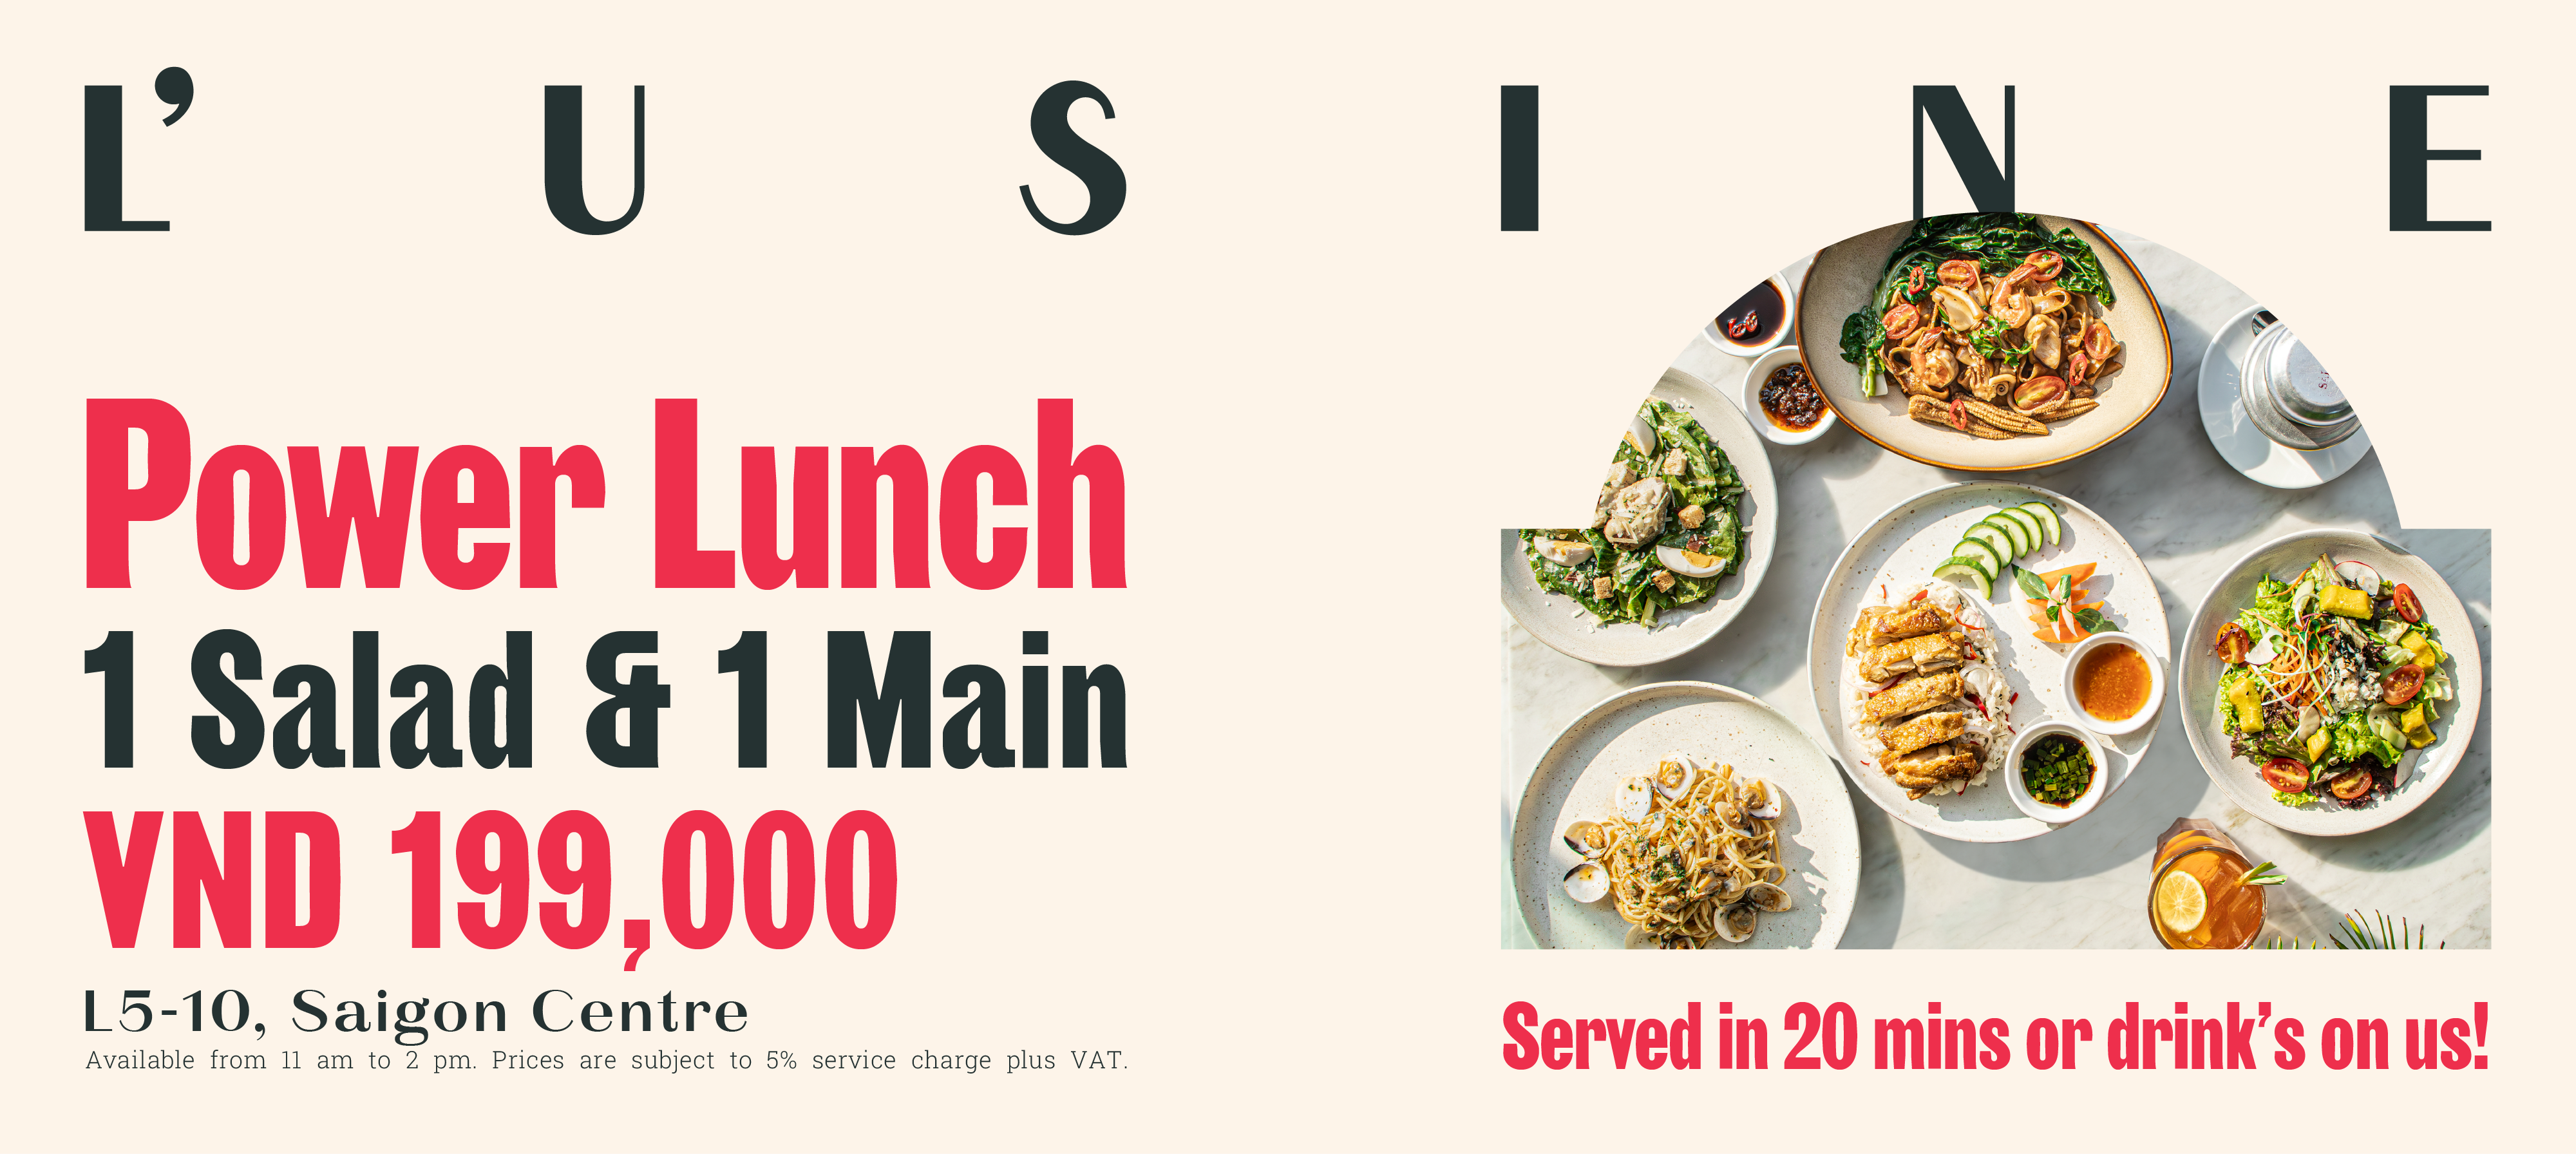 L'USINE - COMBO LUNCH ONLY AT VND199K